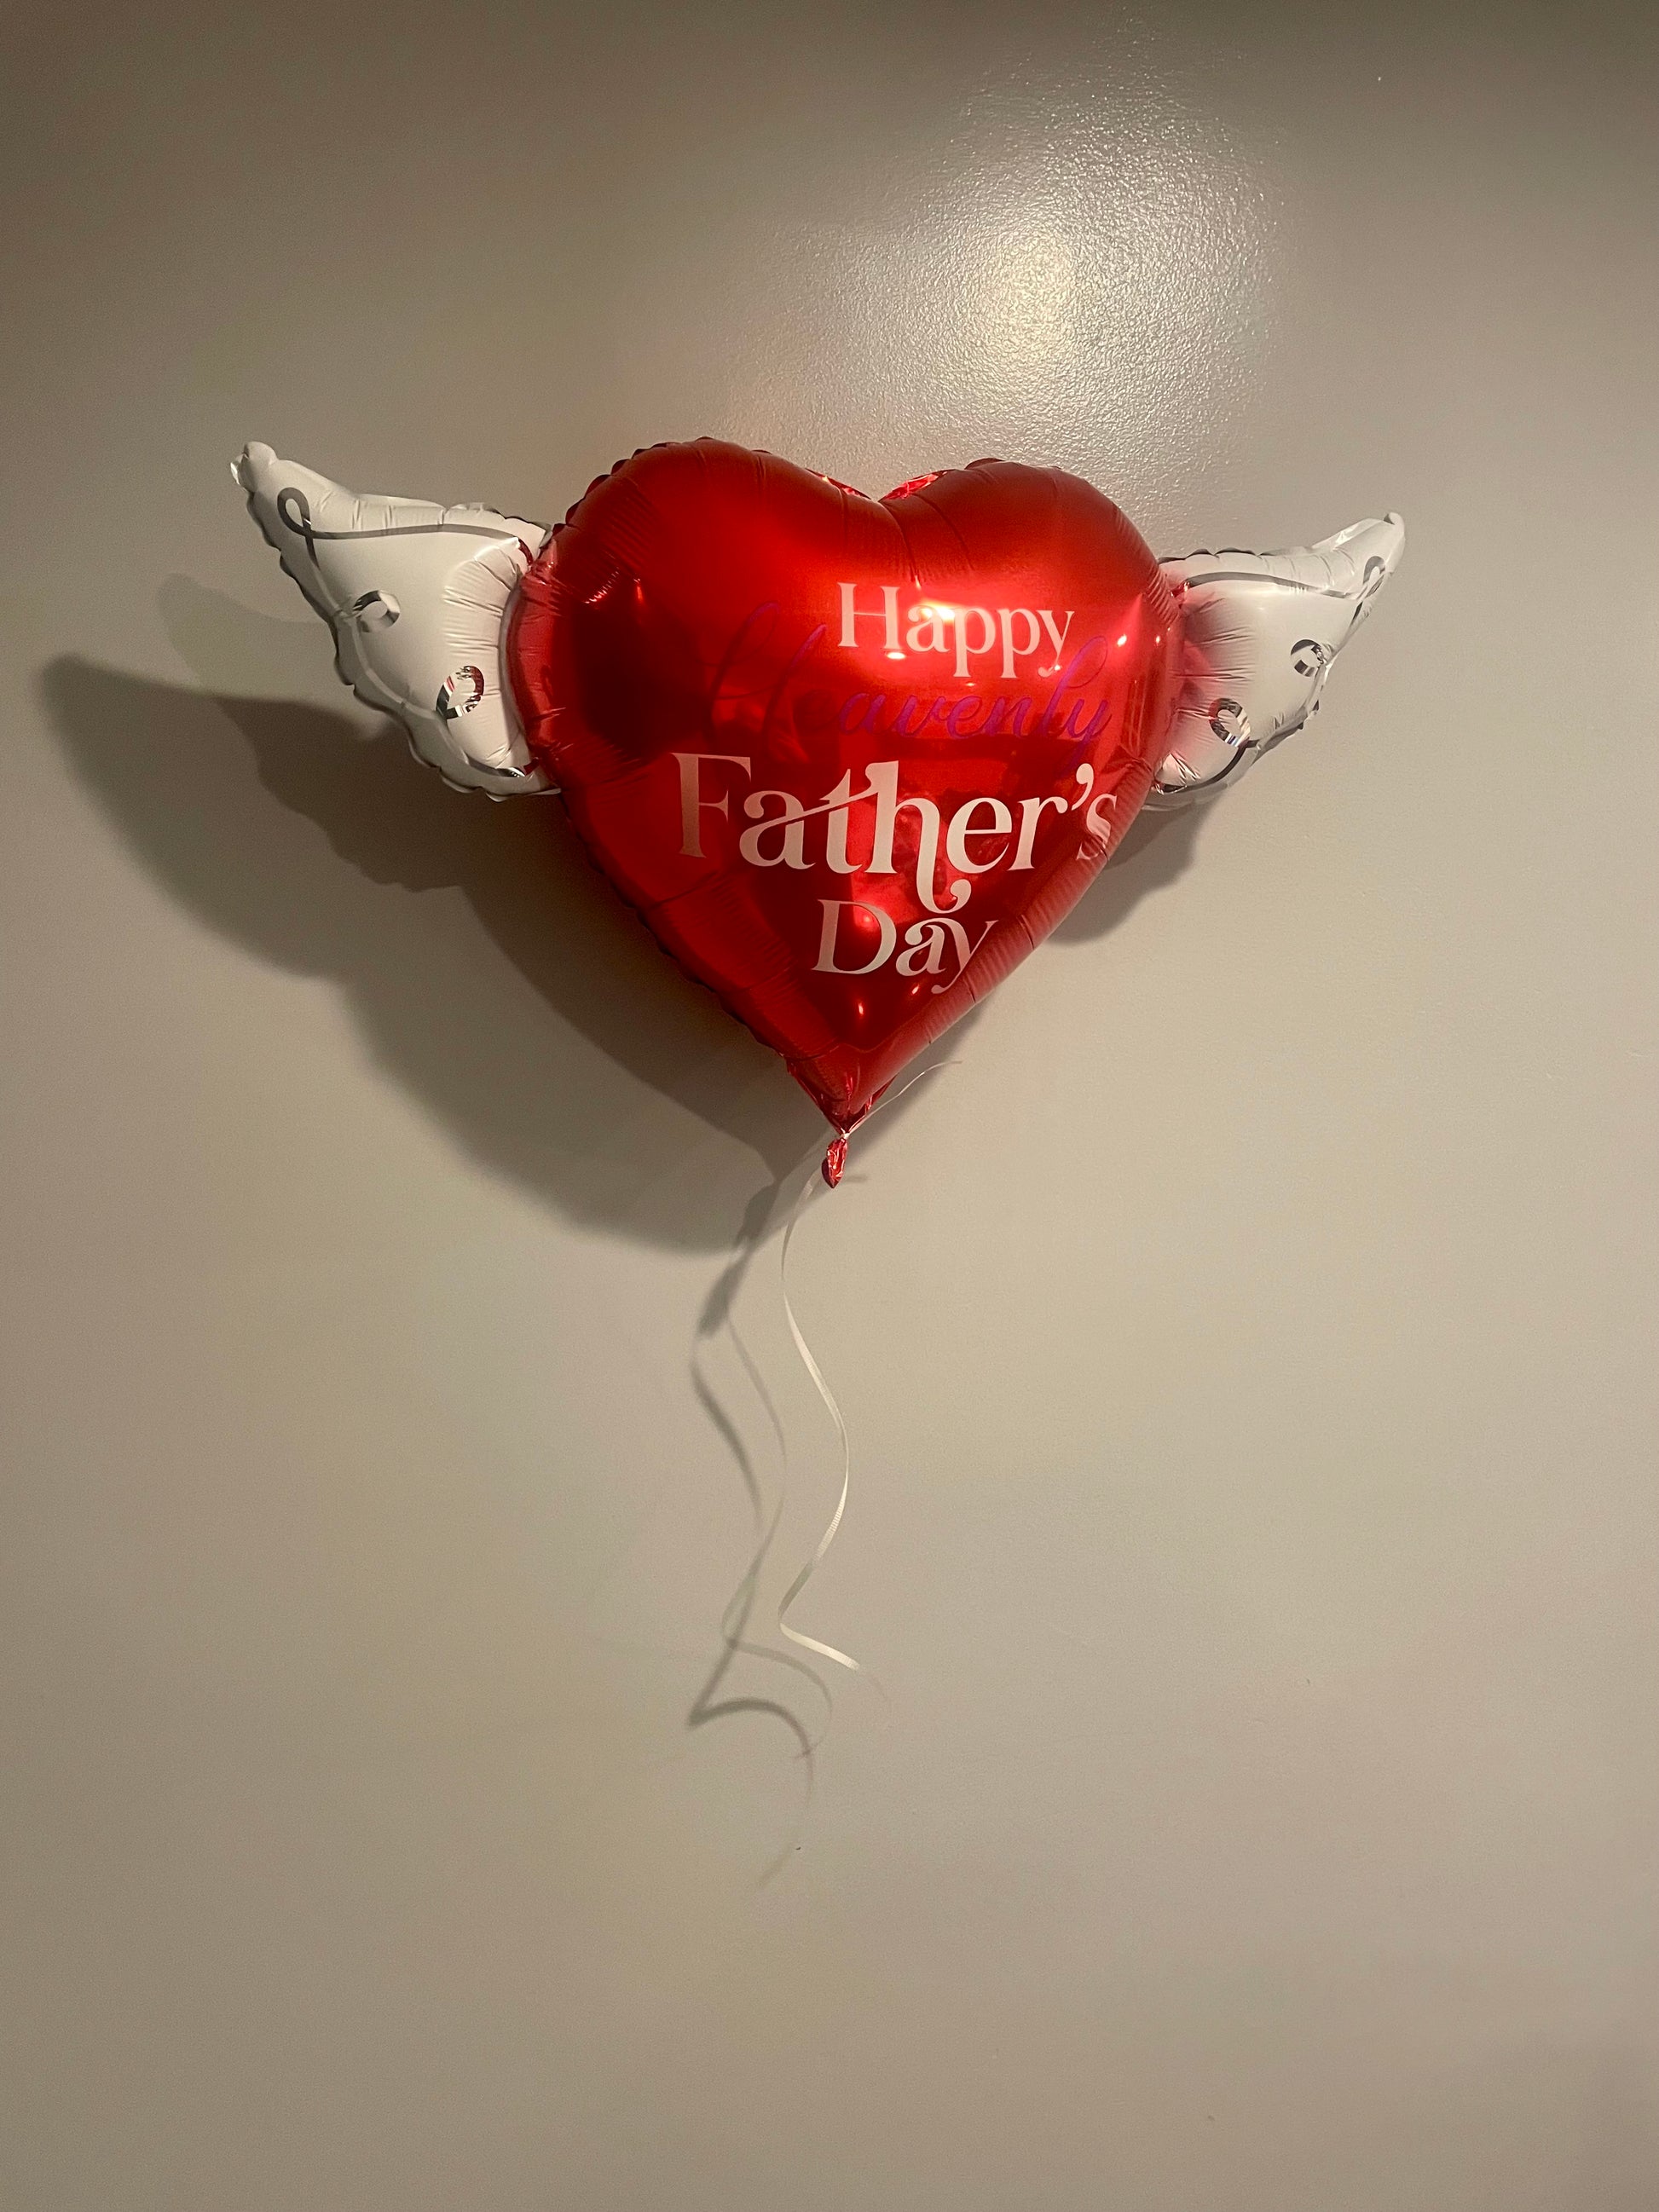 Happy Heavenly Father's Day Balloons Heart Shaped with angel wings (Red)